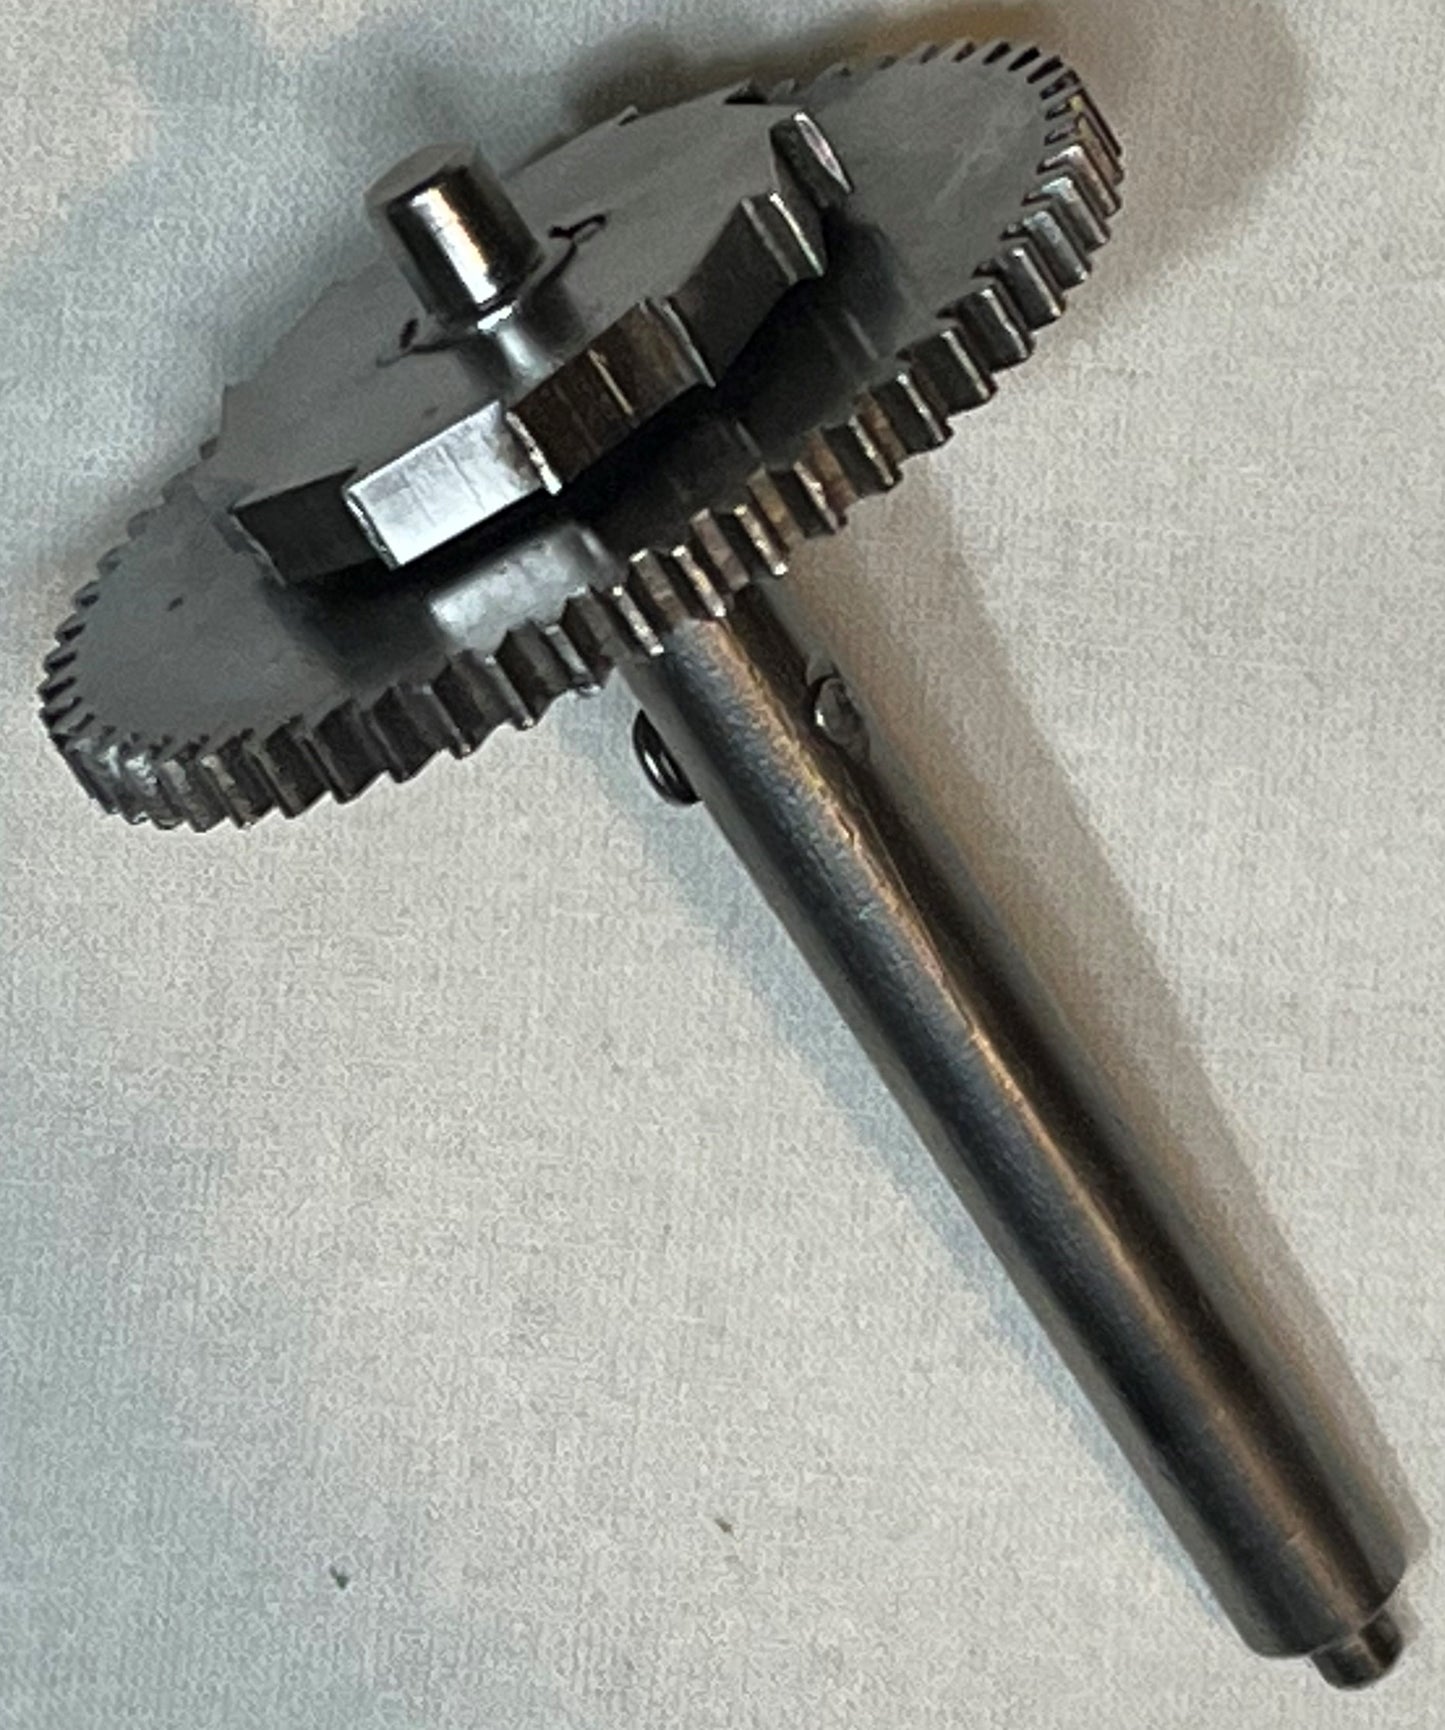 "Certified Original" Edison Spring Barrel Shaft with Winding Gear and Ratchet